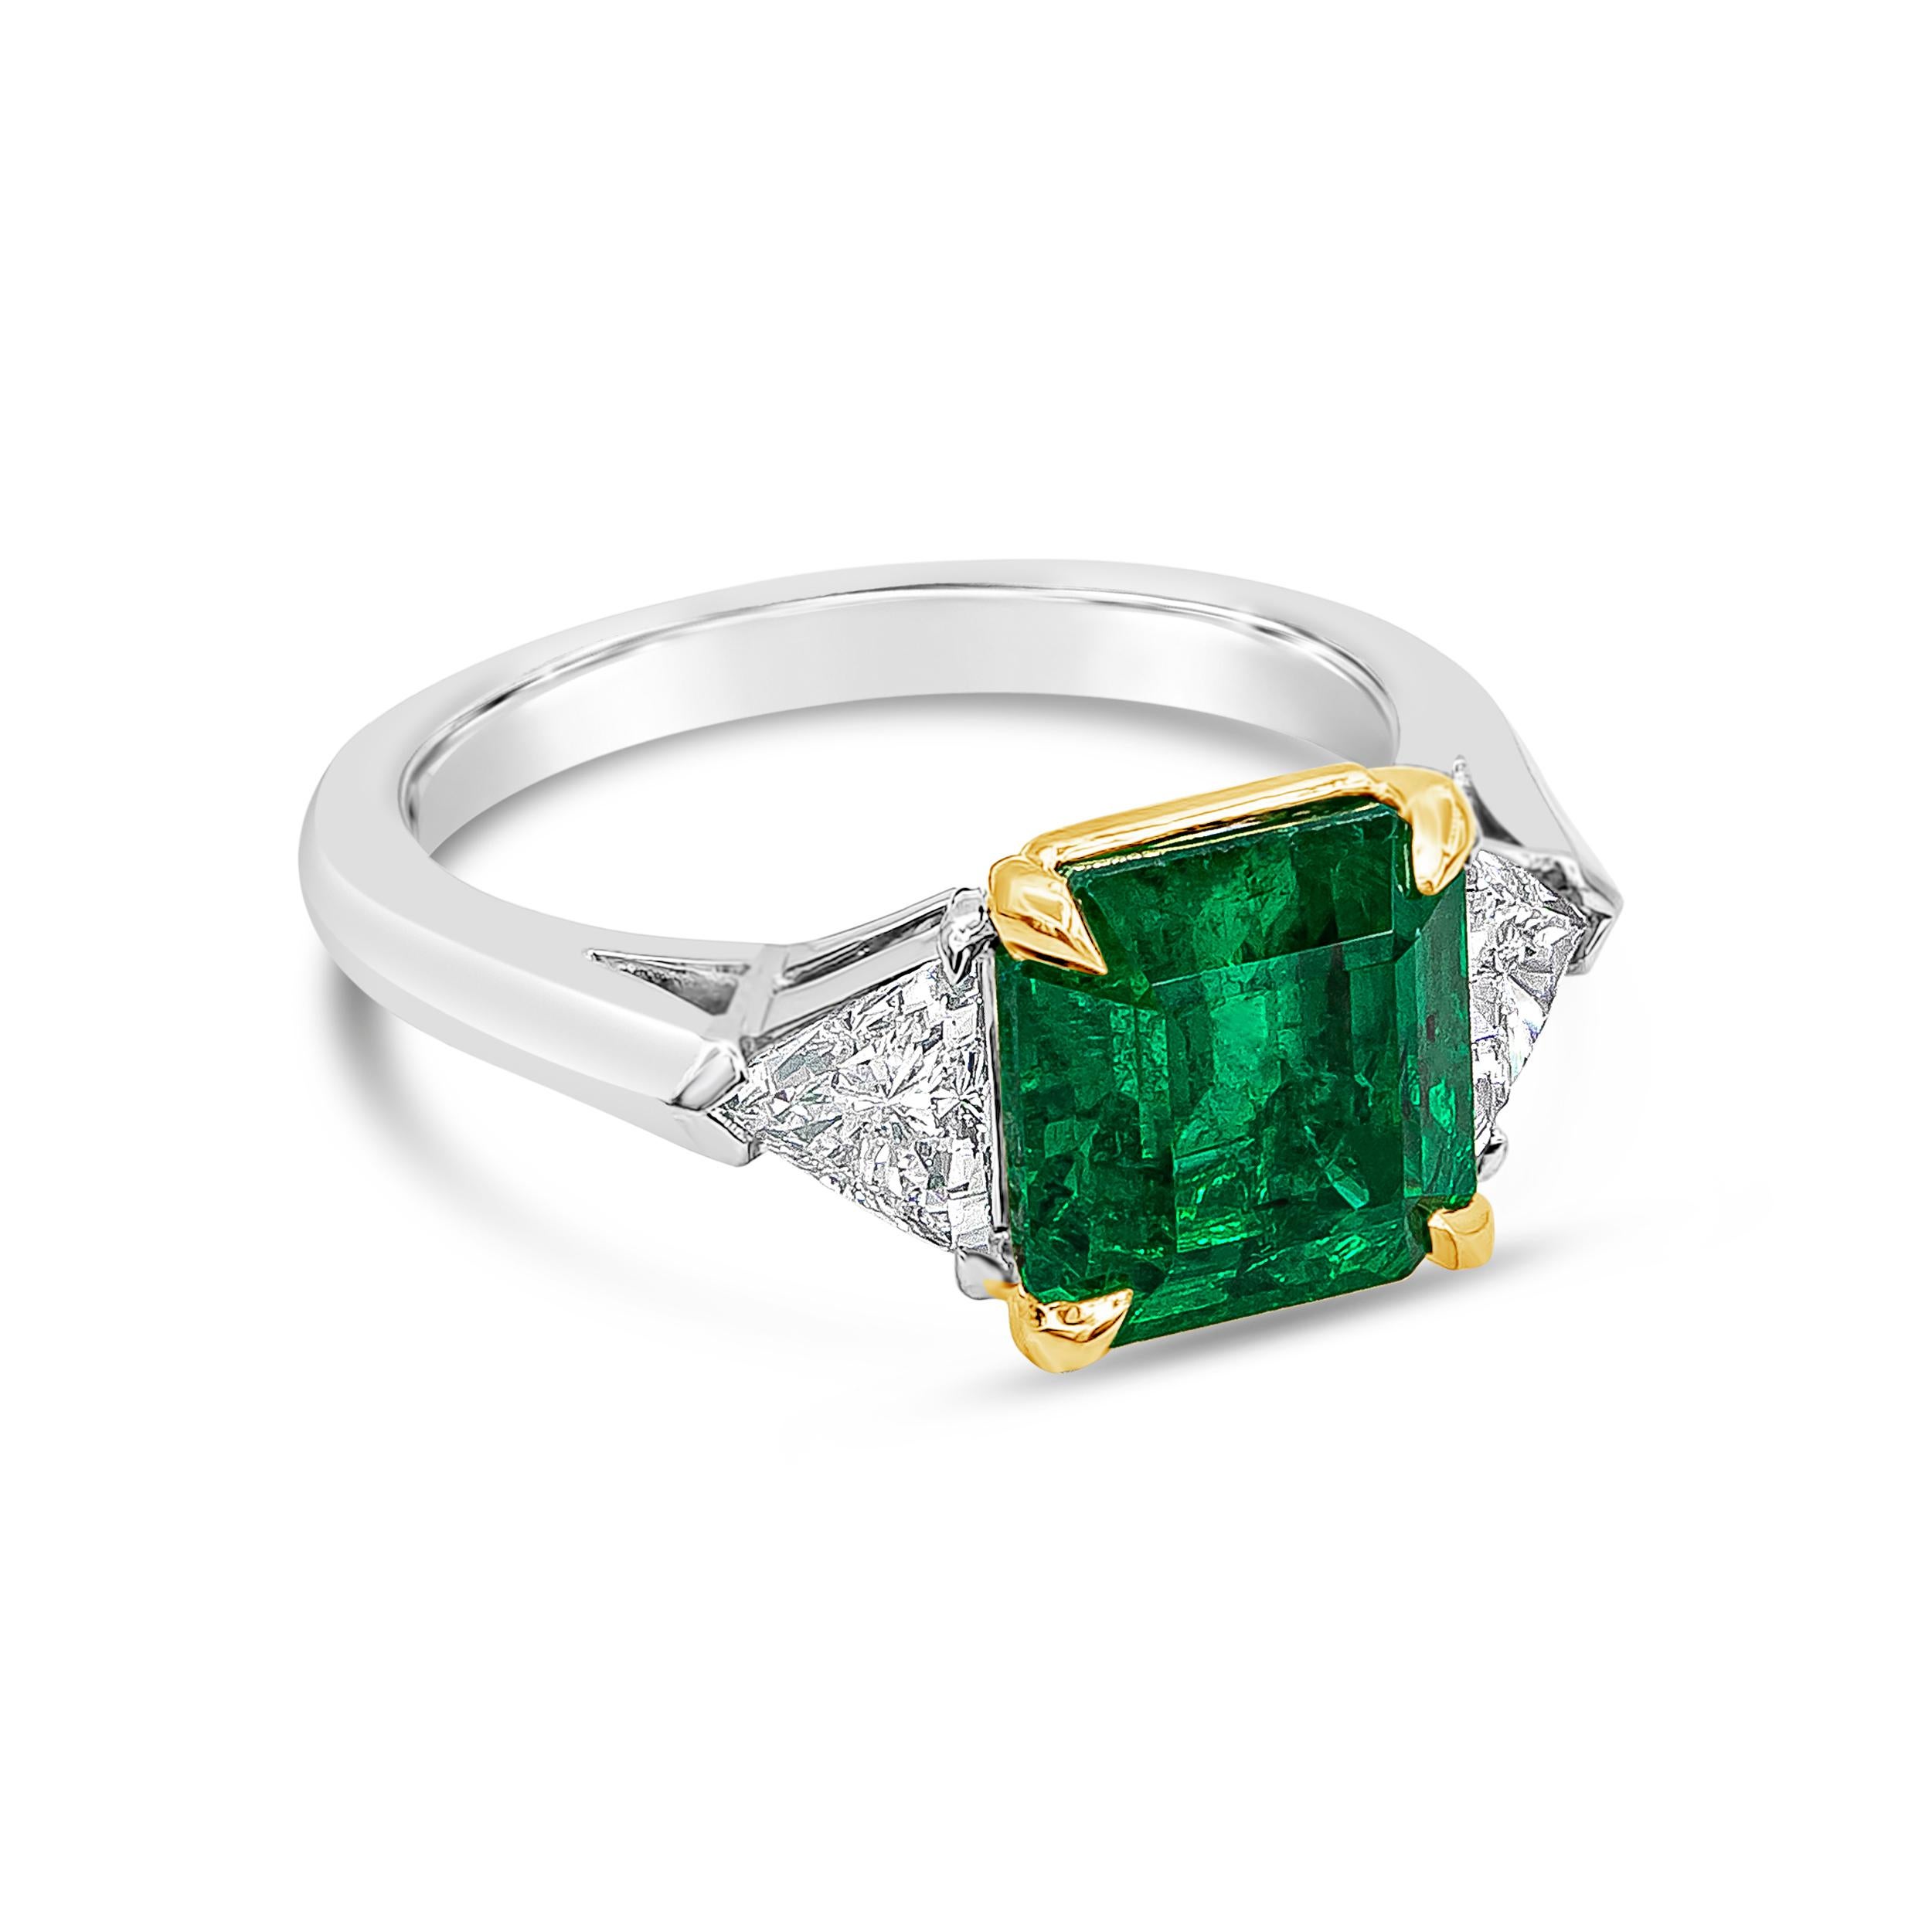 A timeless engagement ring style showcasing a 3.16 carats emerald cut green emerald, set in a 18K Yellow Gold four prong basket setting. Flanked by brilliant trillion diamonds on each side weighing 0.70 carats total. Made in Platinum band and Size